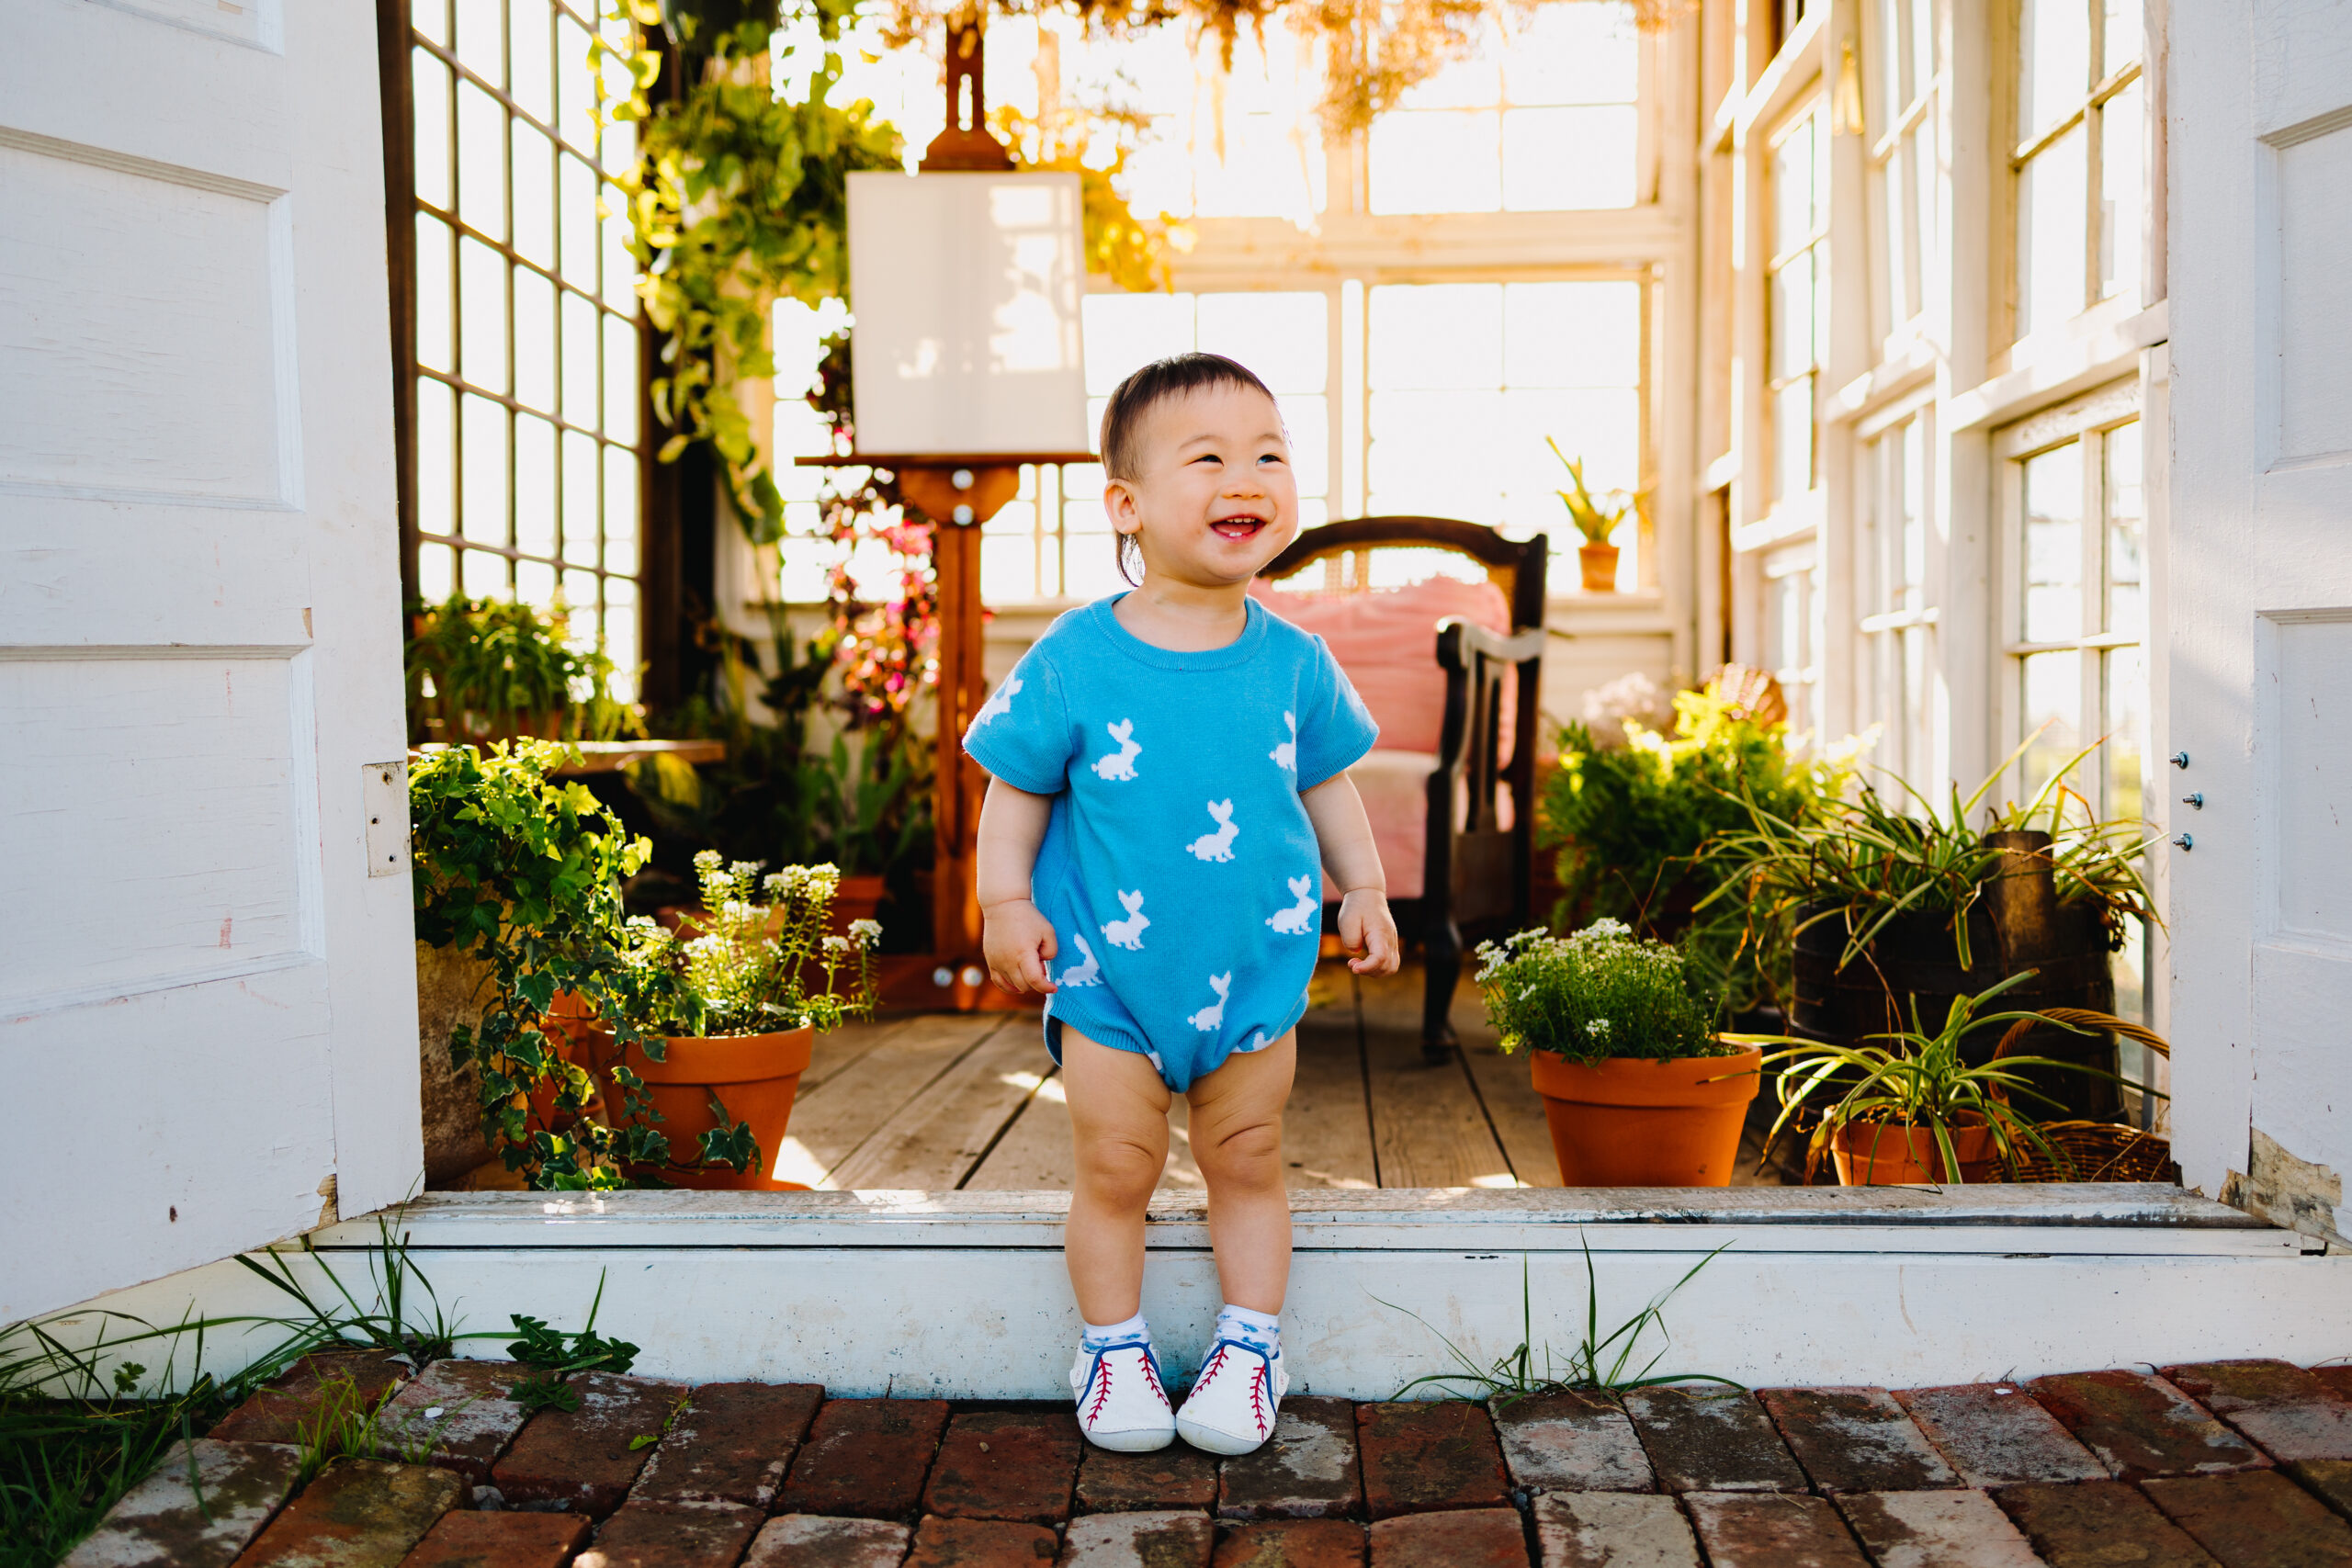 a little boy in a blue romper with white bunnies on it stands in front of a white greenhouse full of plants and an artist's easel. He is smiling off to the side while looking at his parents.